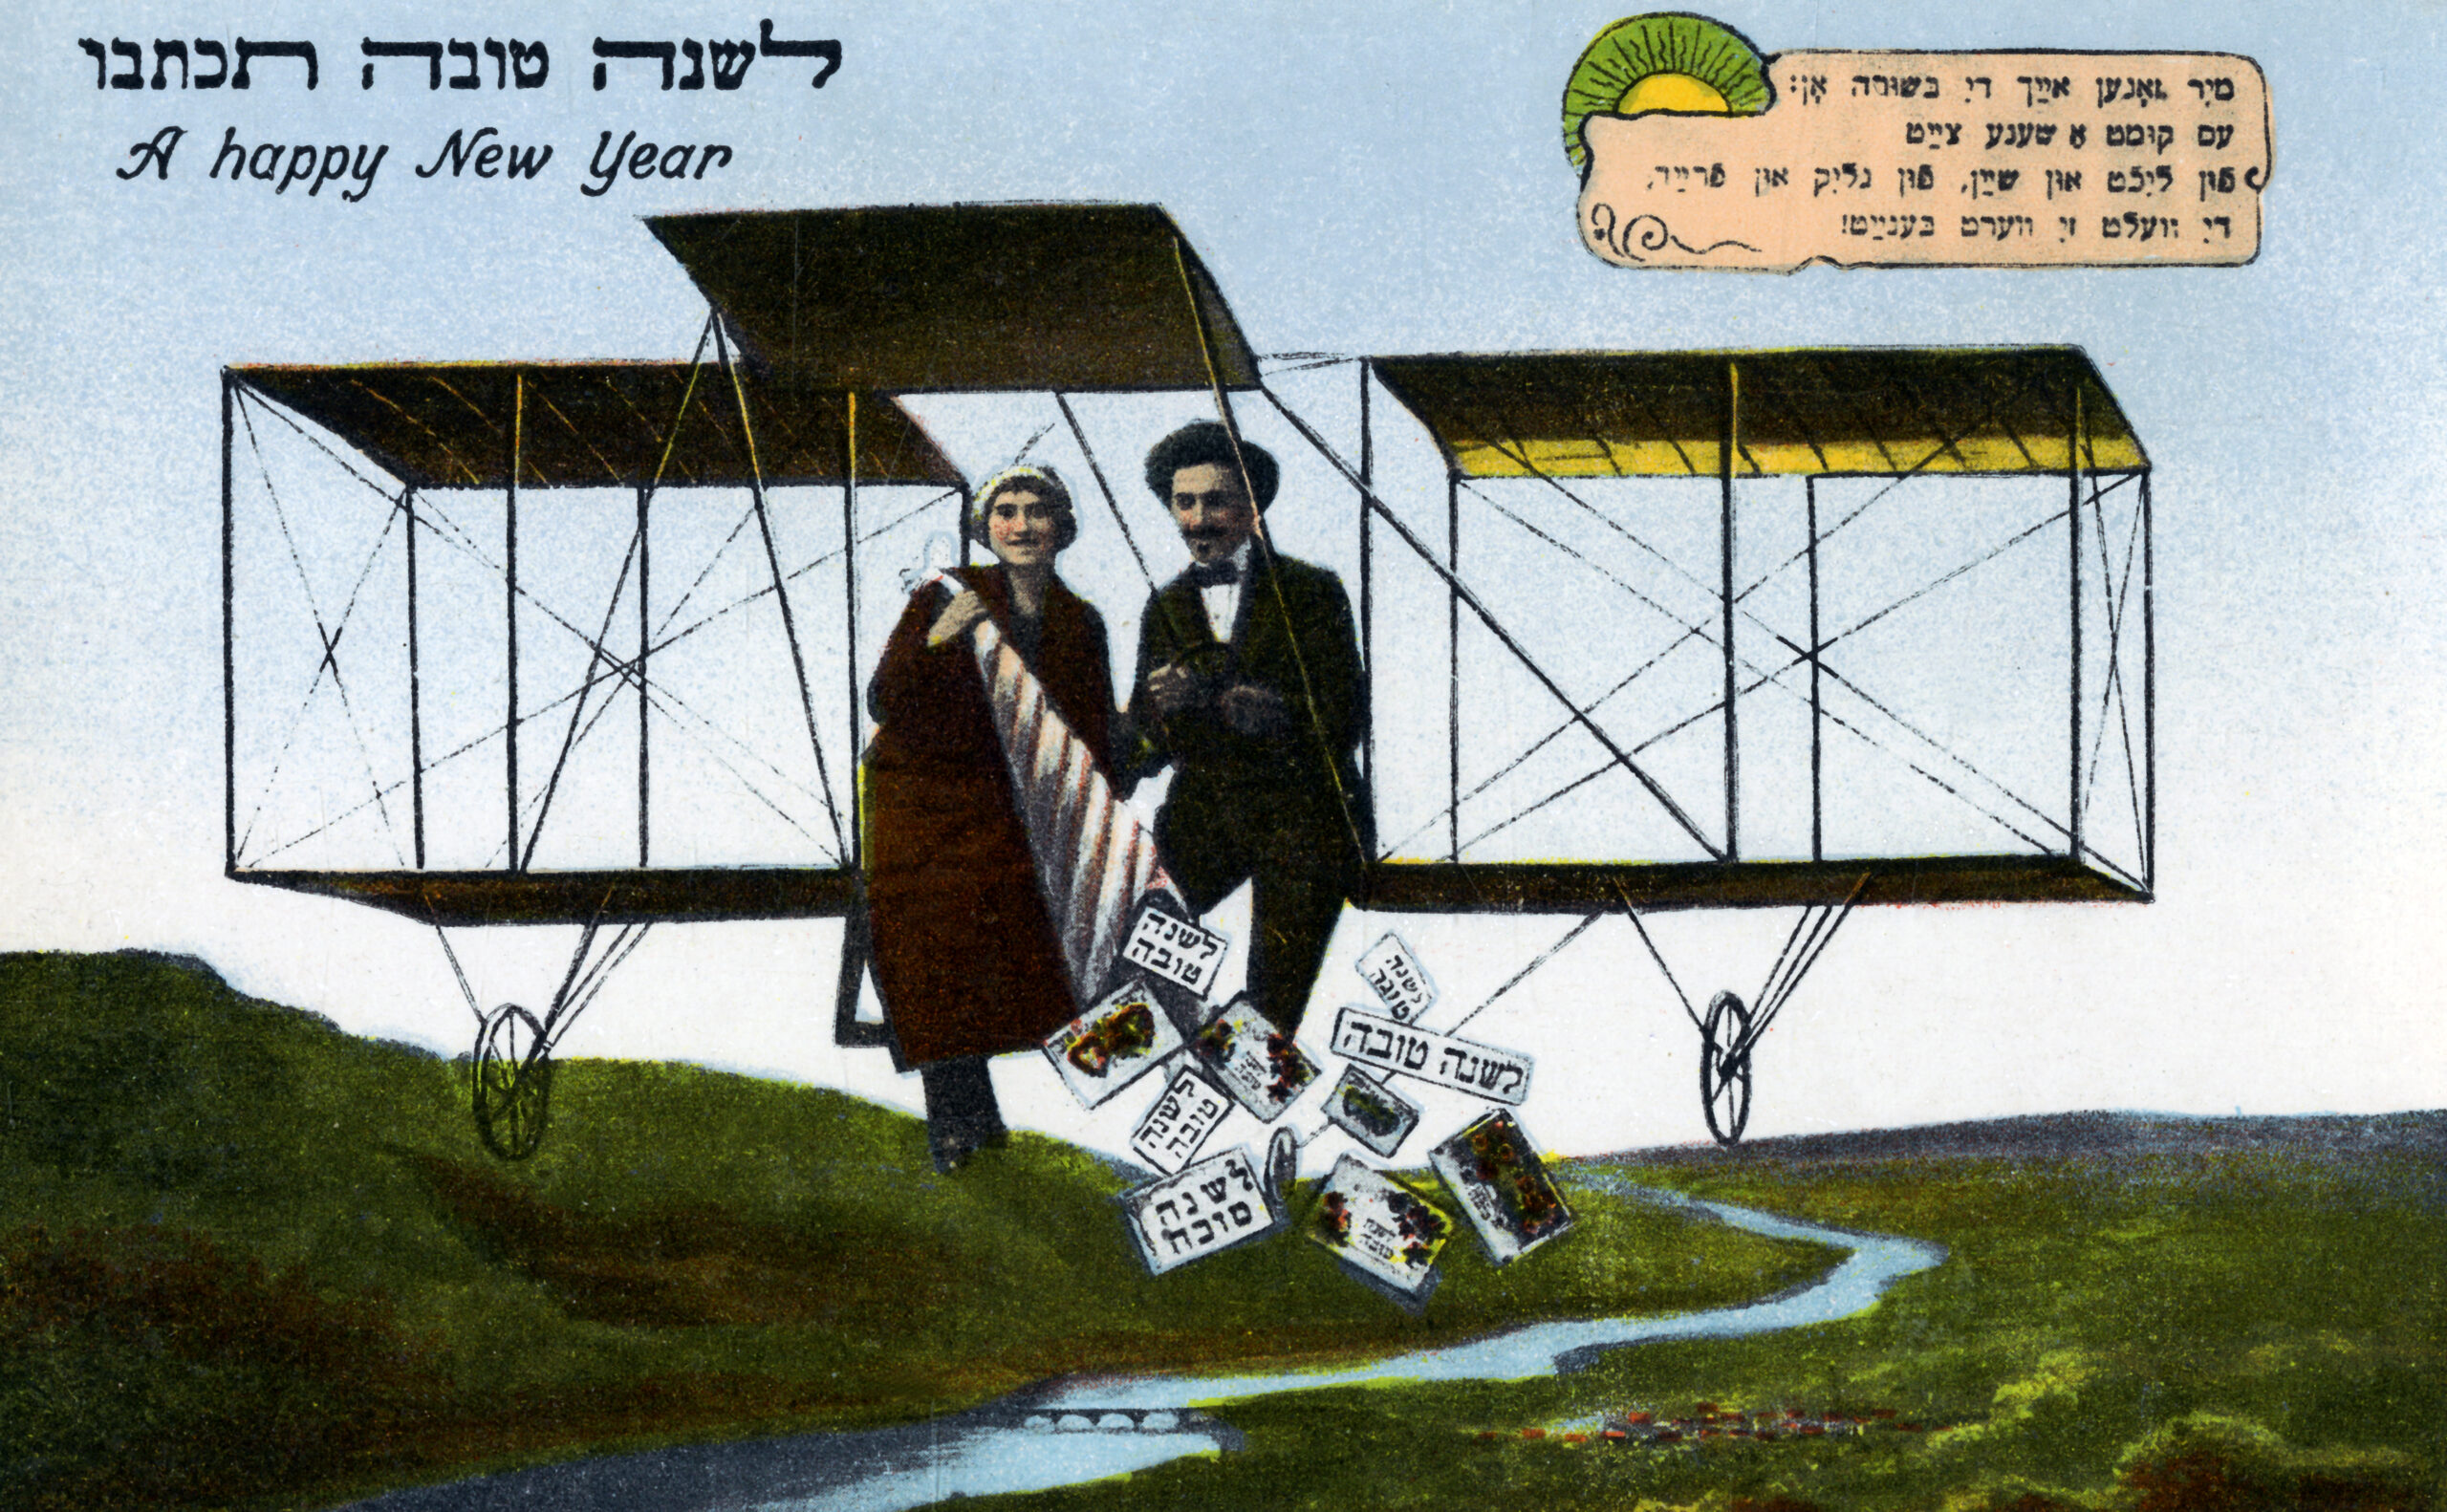 
A postcard featuring a couple flying on an early airplane throwing holiday greetings to the ground below, with New Year&#8217;s greetings in Hebrew and English. Pierce Archive LLC/Buyenlarge via Getty Images.






